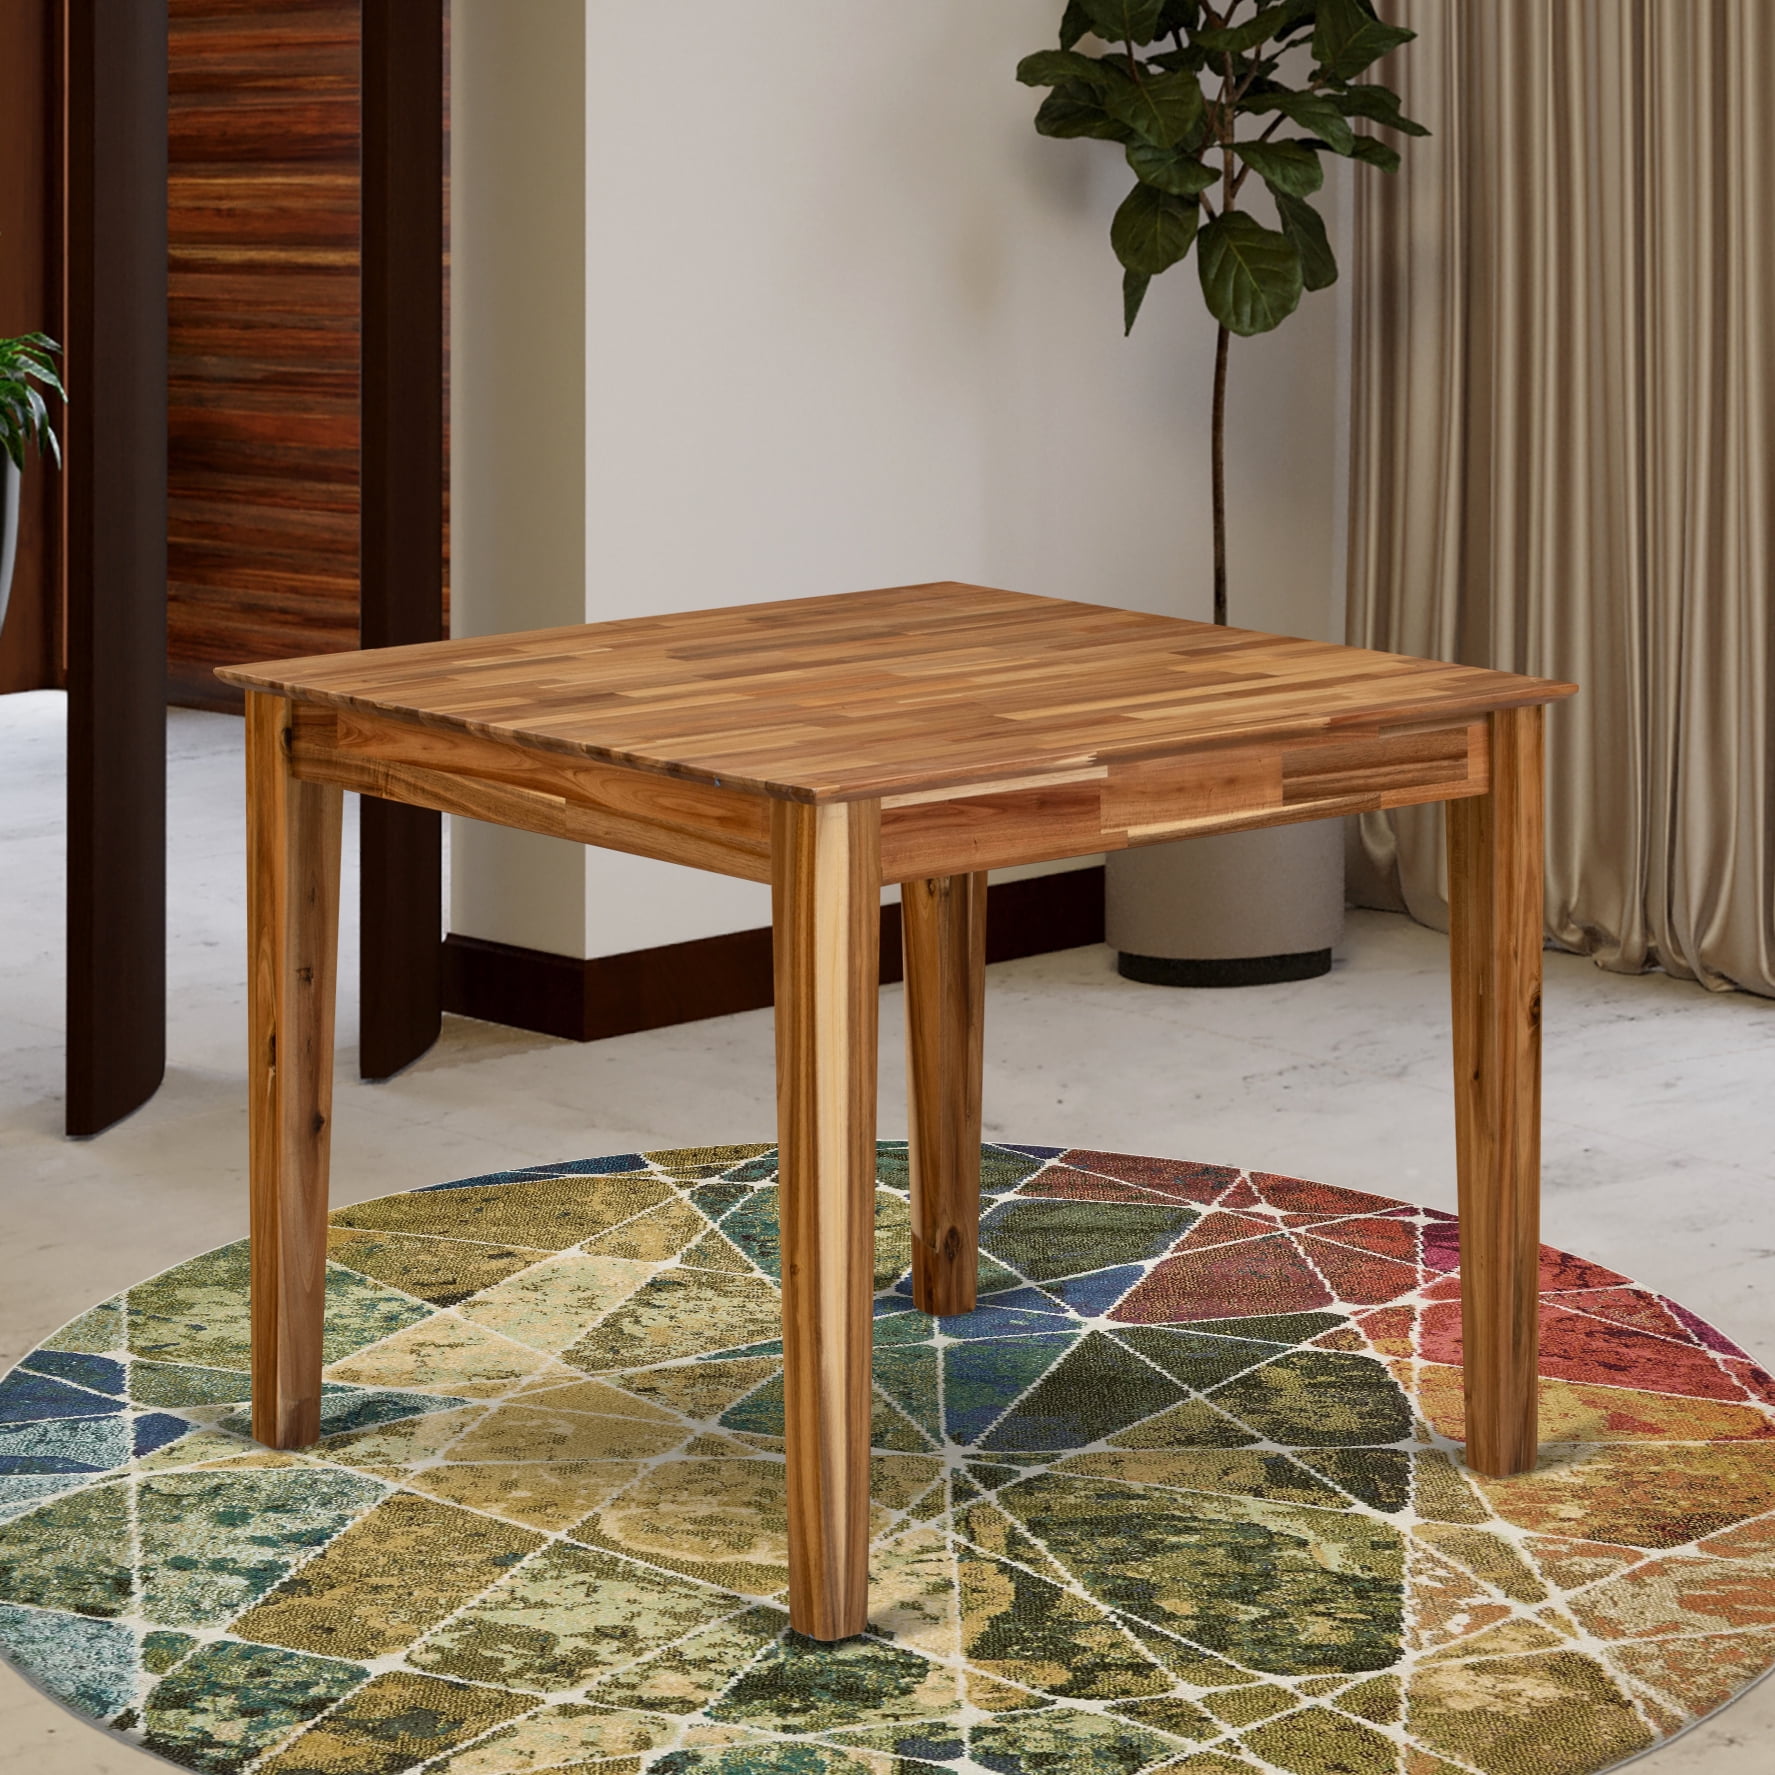 Oak Details about    Wooden Coffee Table Coffee Tables White Chrome End Tables Furniture 